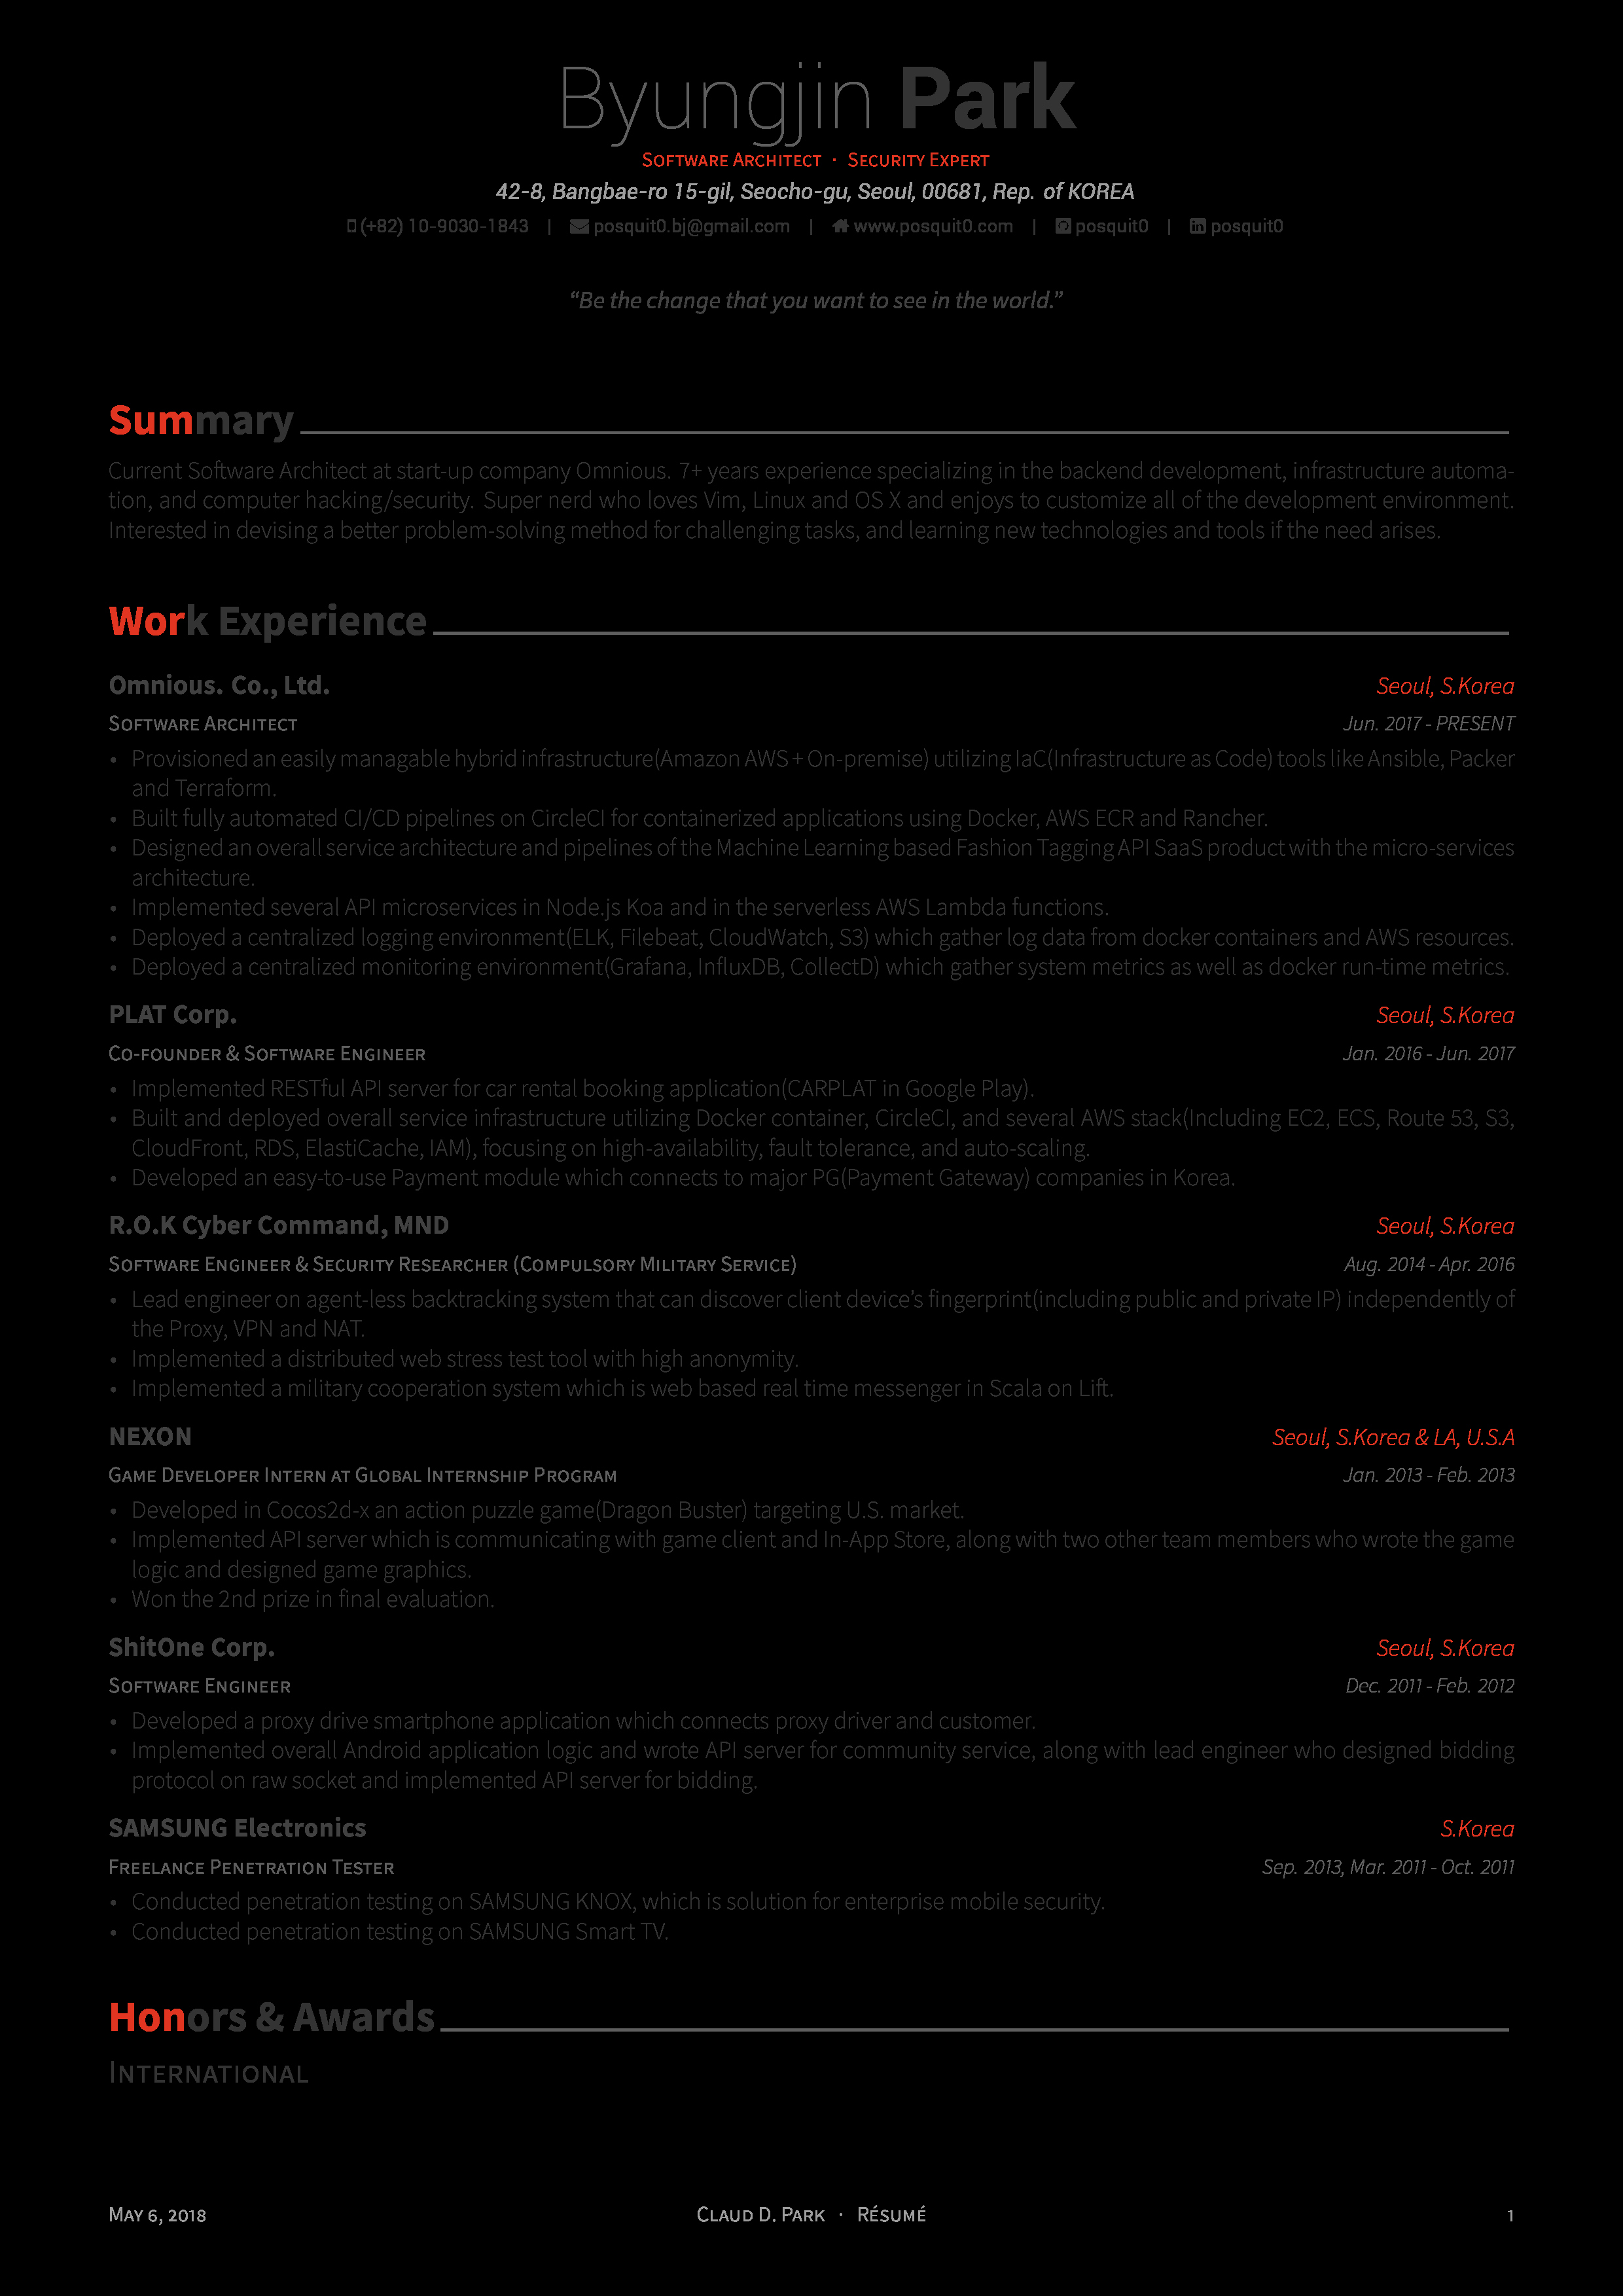 Cover Letter Latex Template Awesome Github Posquit0 Awesome Cv Awesome Cv is Latex Template